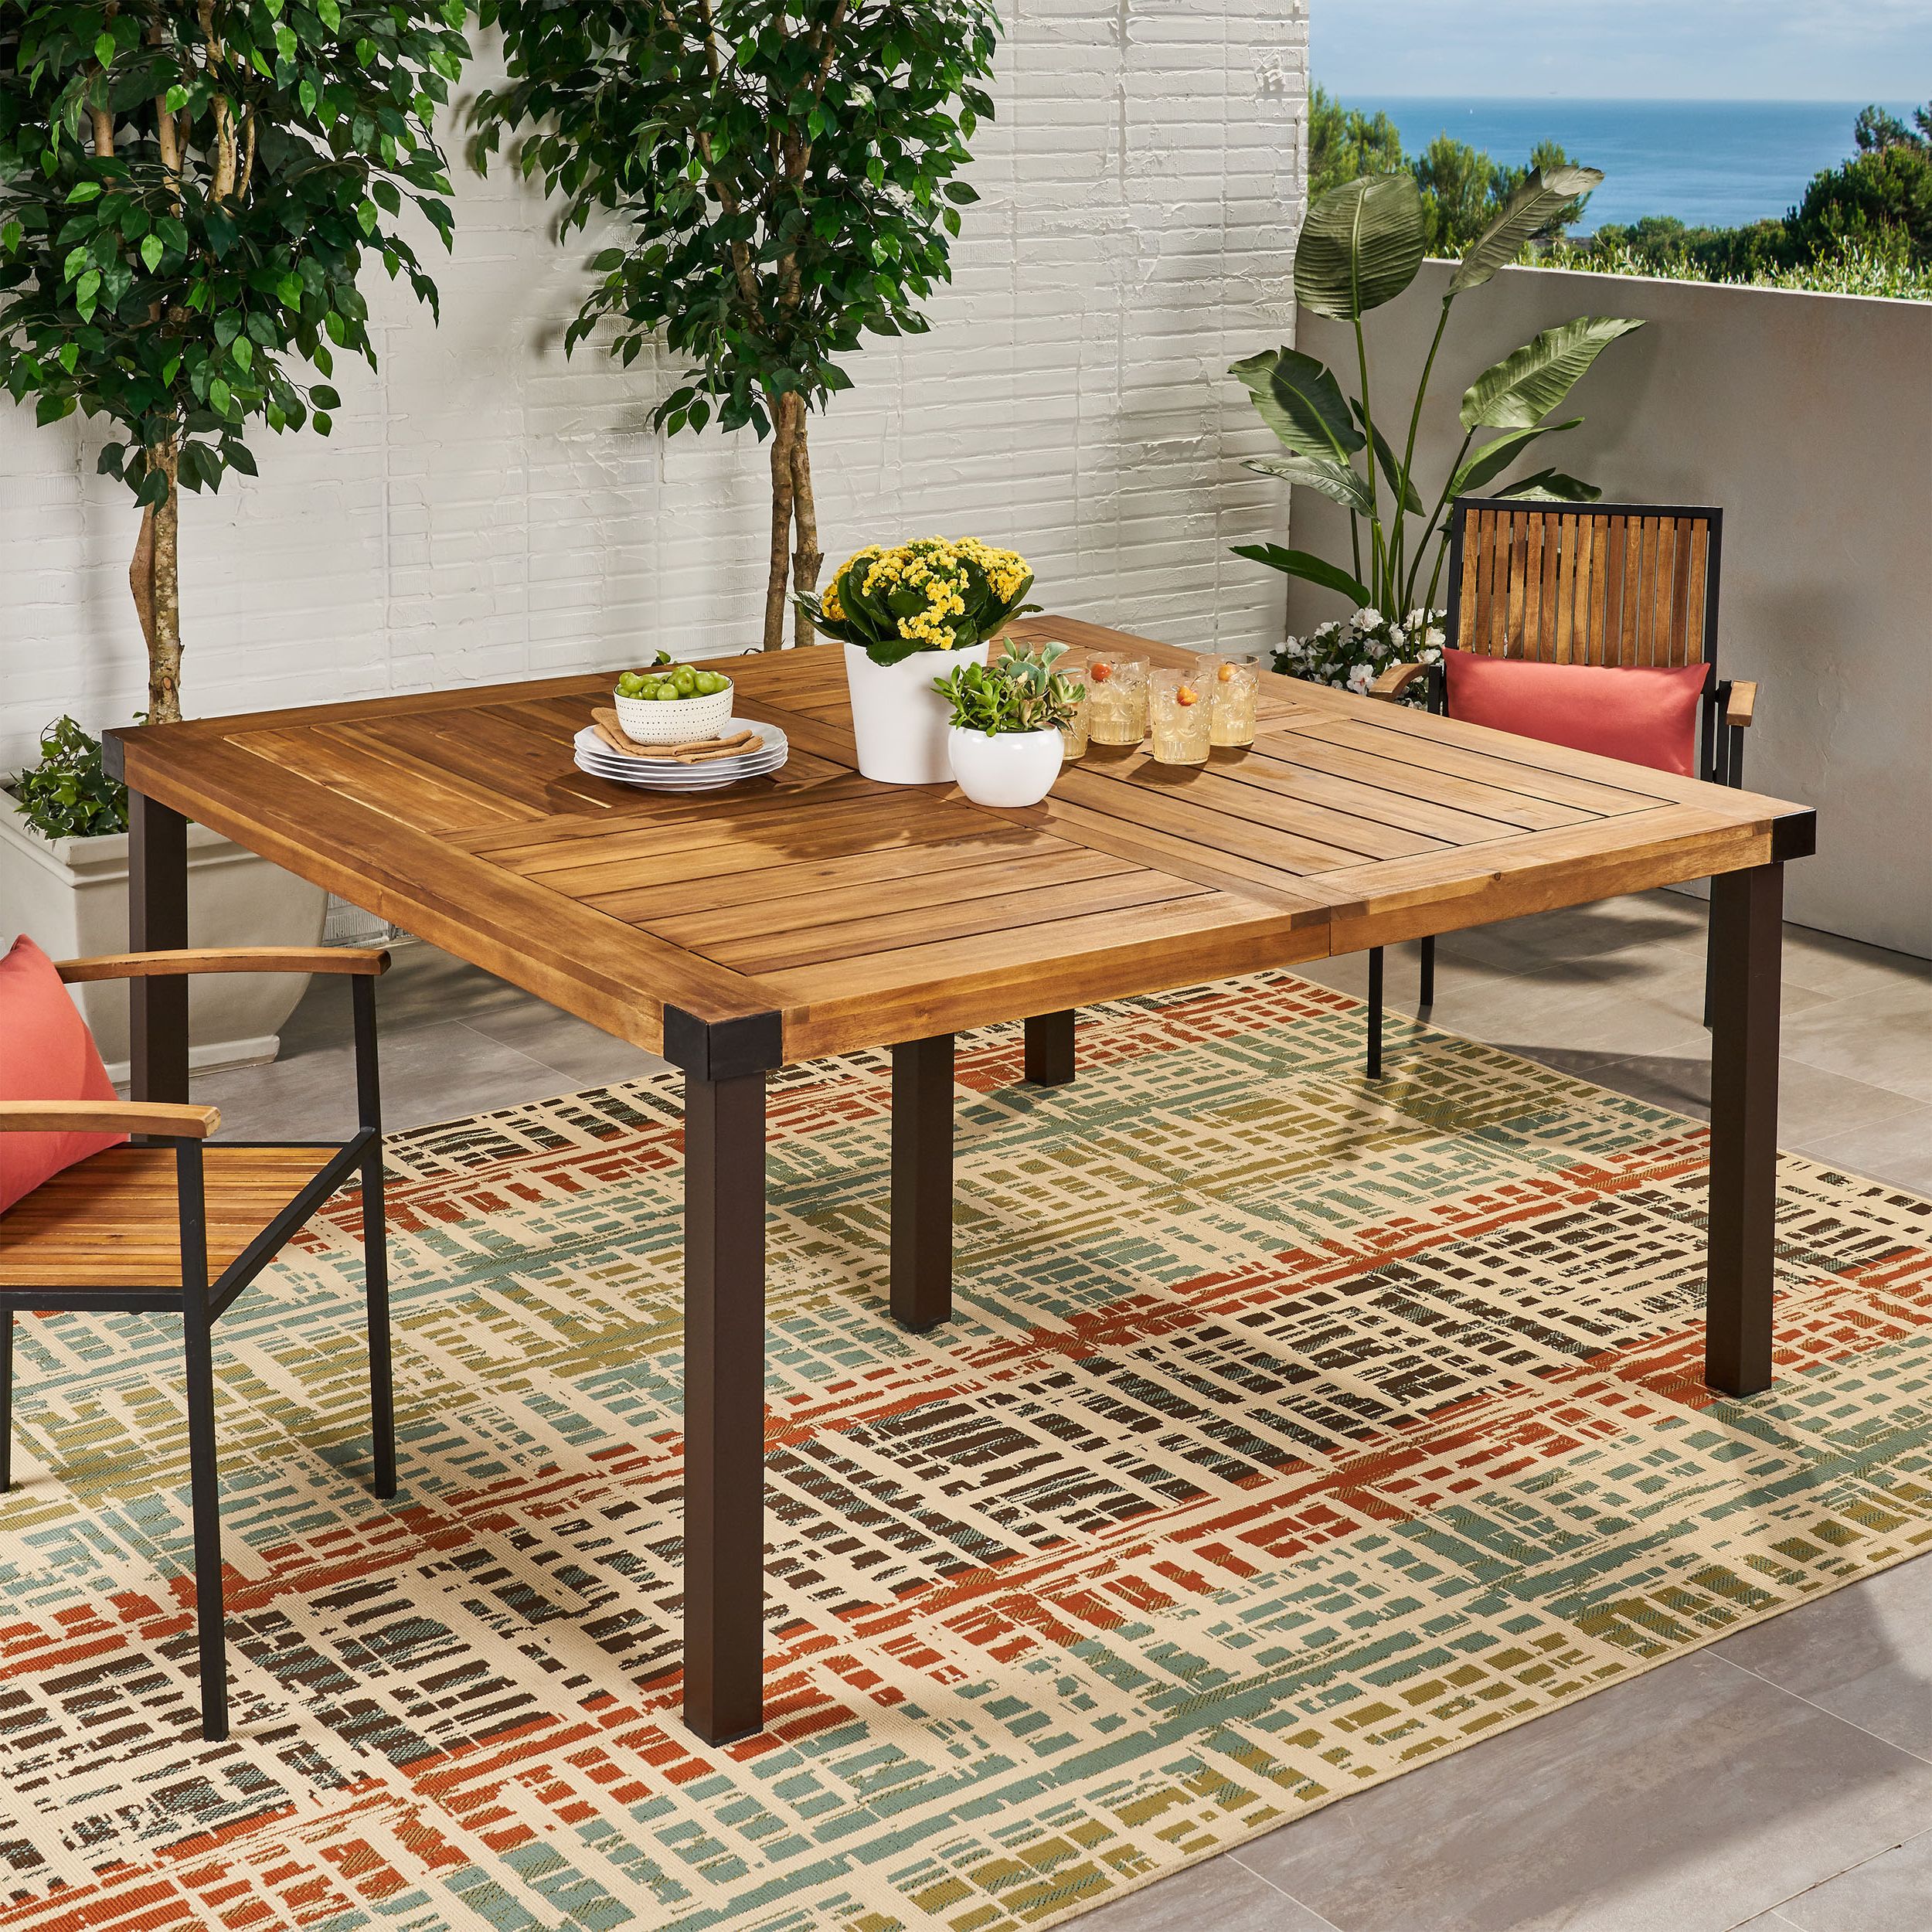 Most Current Splayed Metal Legs Outdoor Tables For Drake Outdoor Acacia Wood Dining Table, Teak, Rustic Metal – Walmart (View 5 of 15)